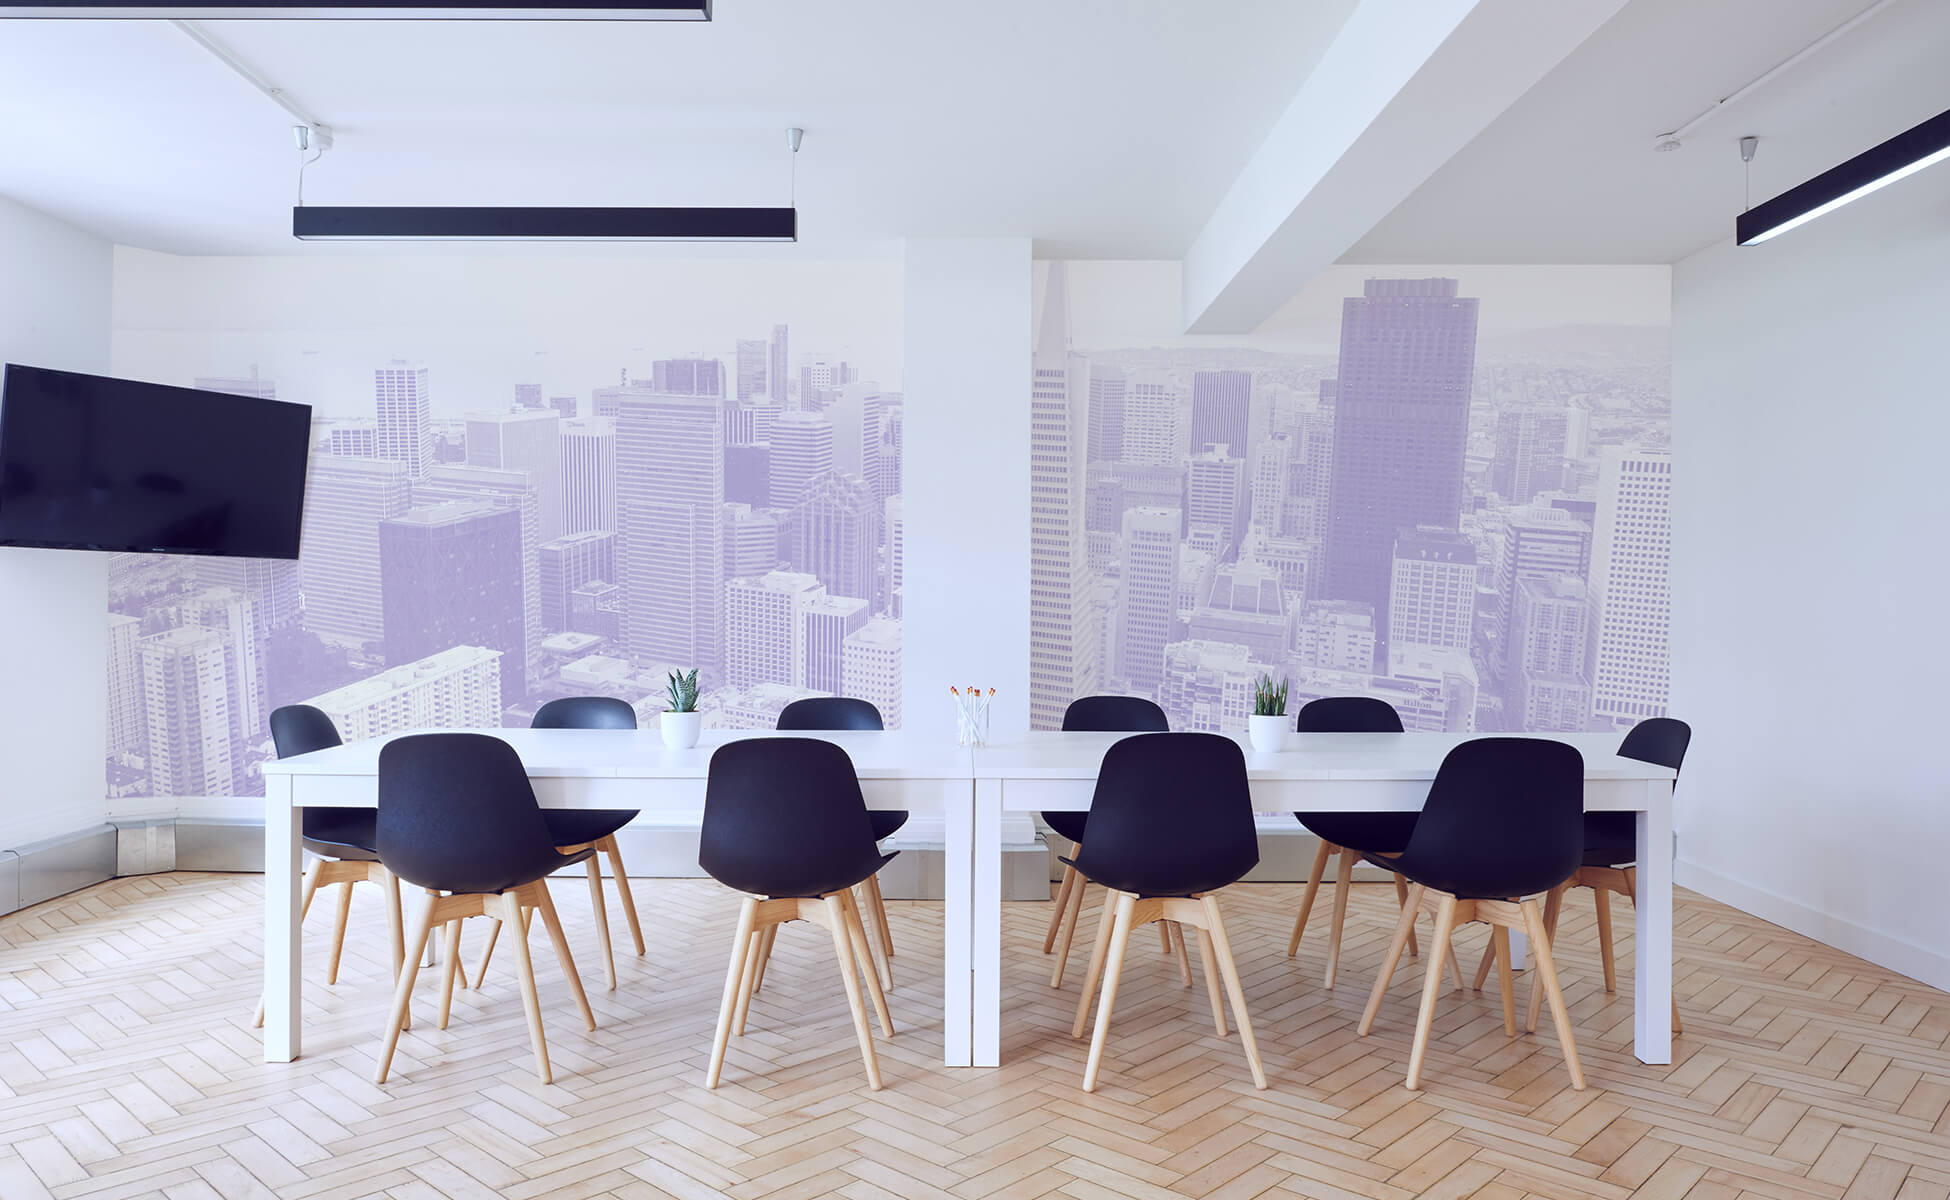 Image of work space with background city wallpaper